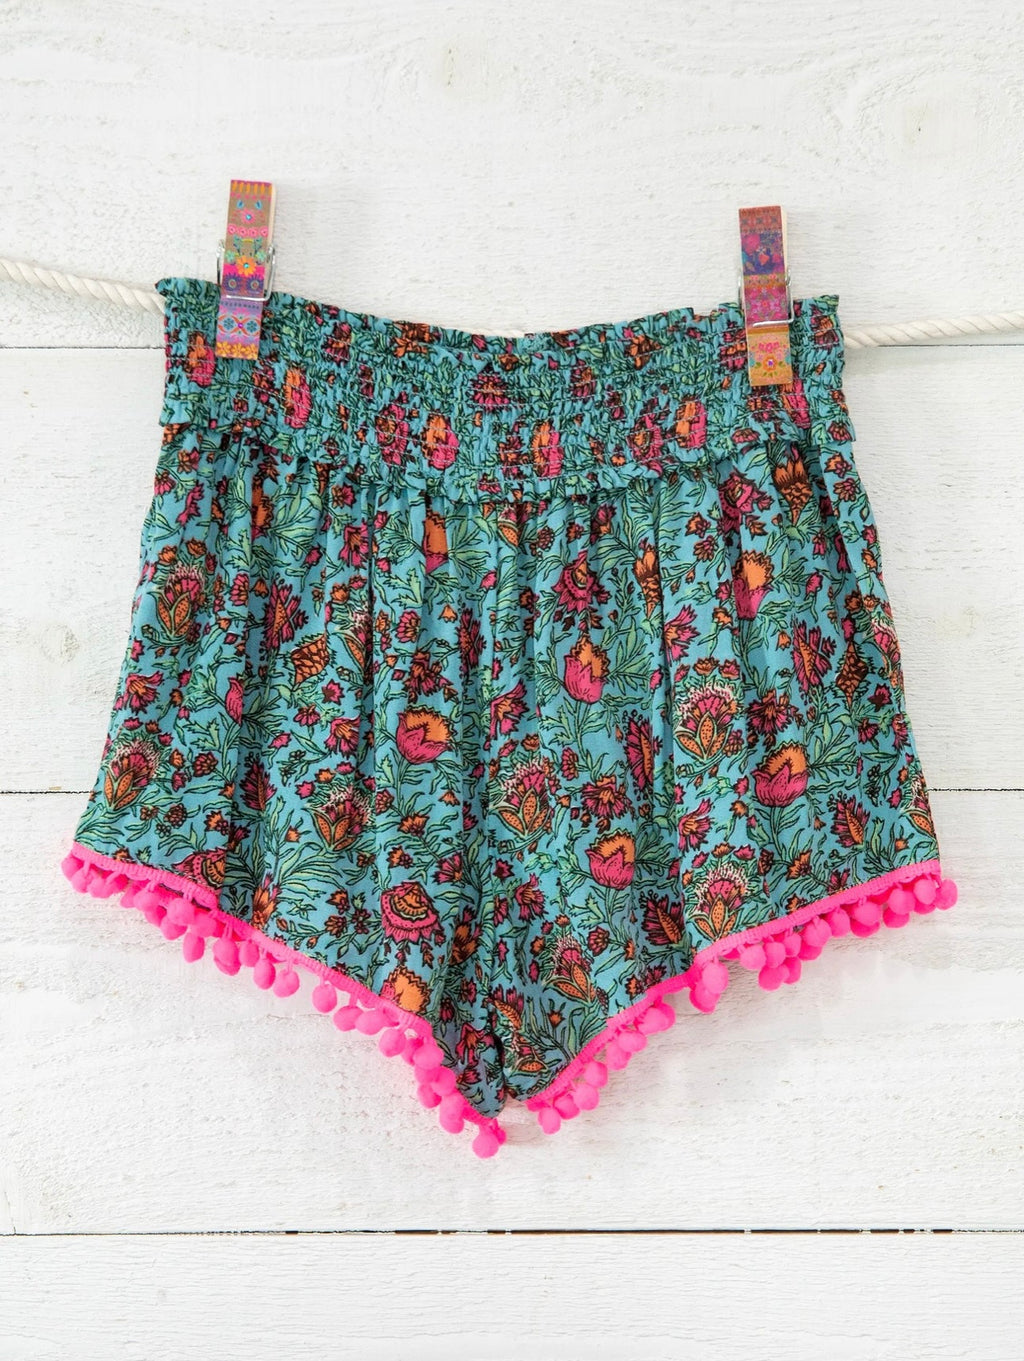 Natural Life Pom Pom Shorts - Turquoise Pink Floral